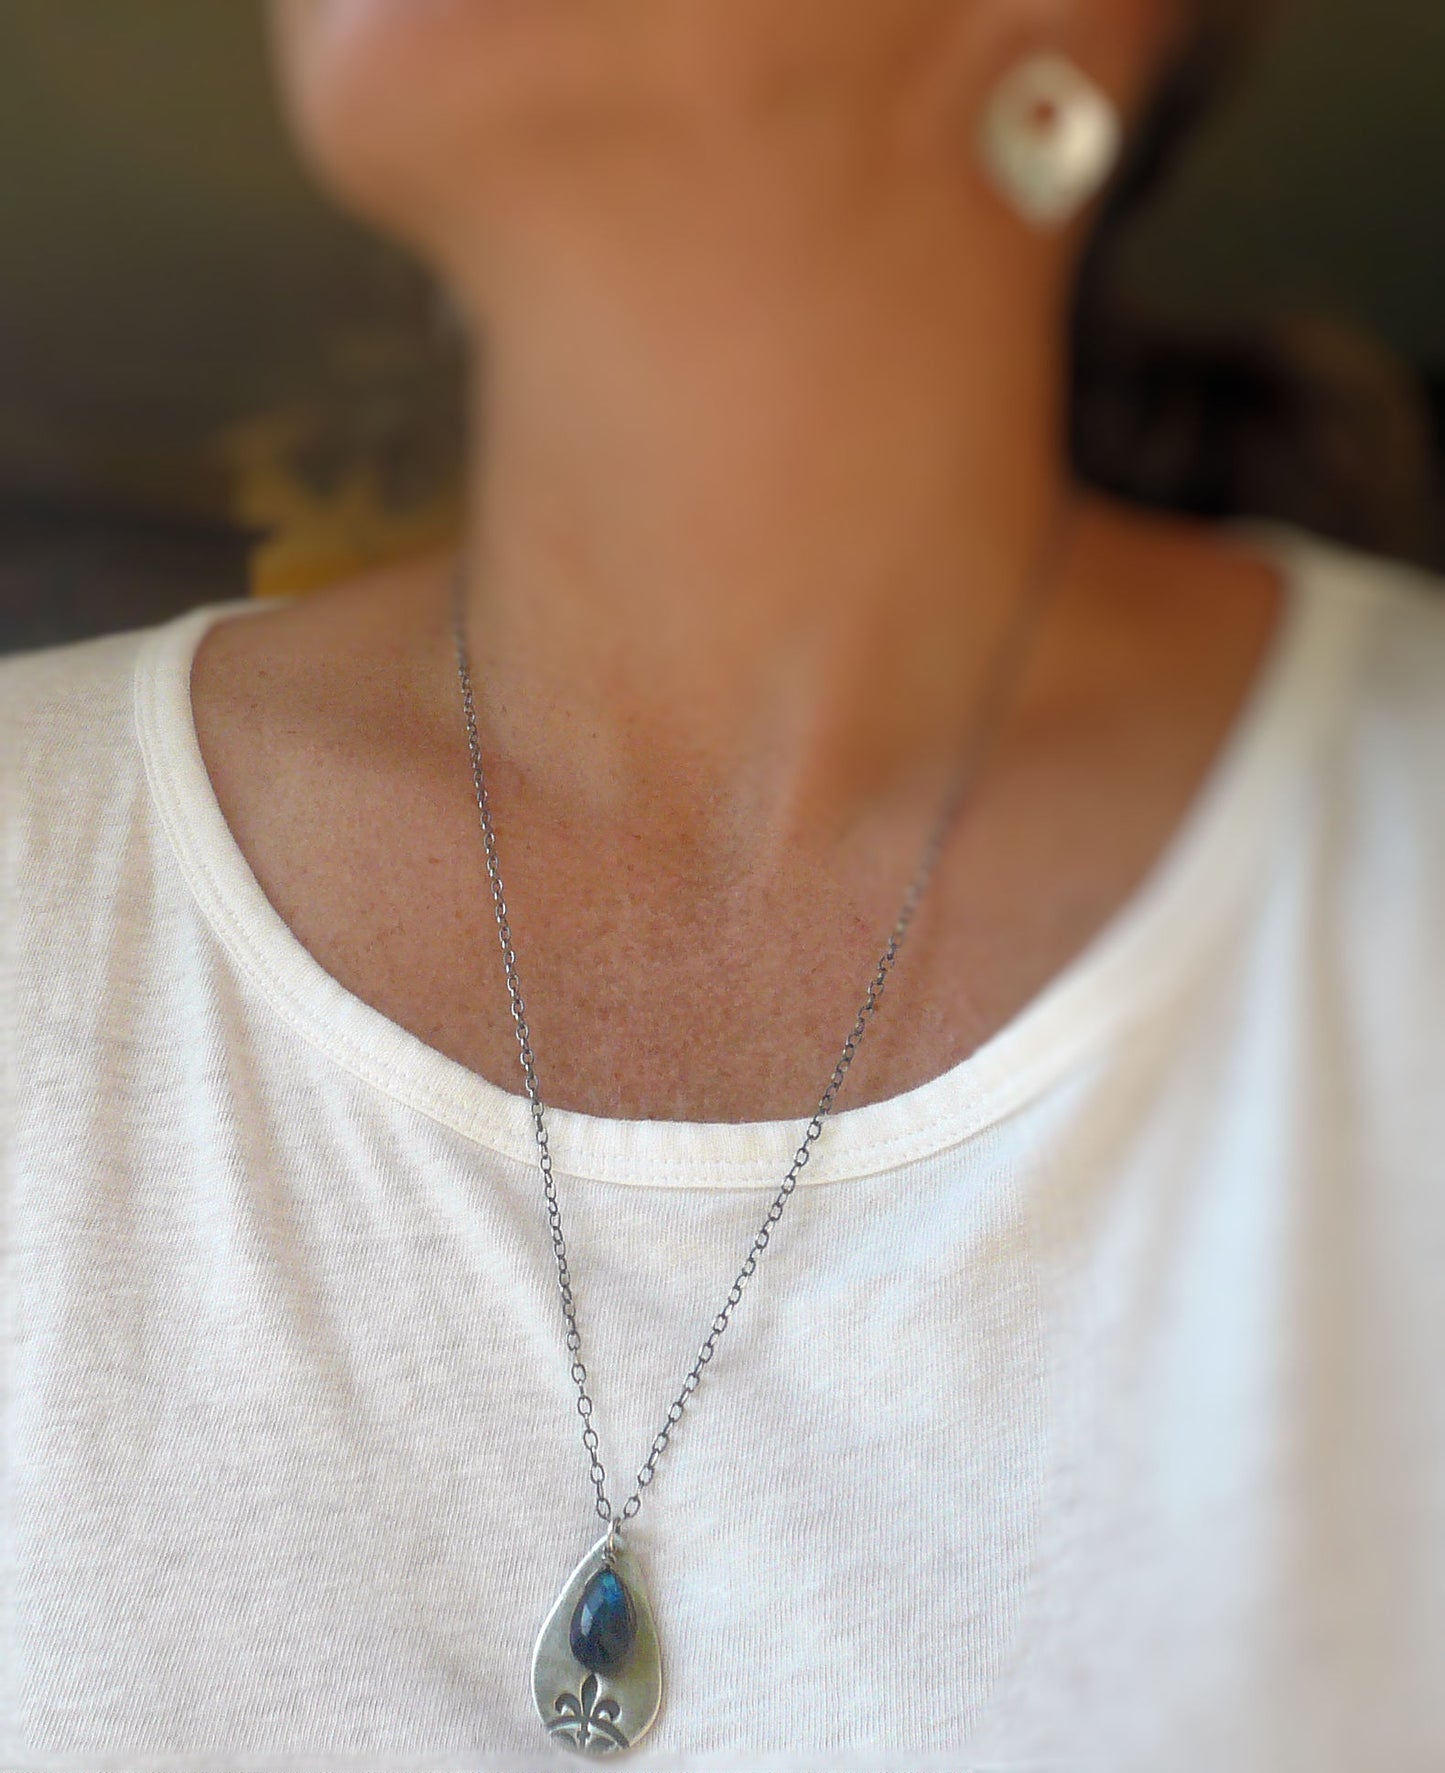 Creole Collection Necklace - Handmade. Blue Labradorite/Spectrolite. Oxidized Fine and Sterling Silver